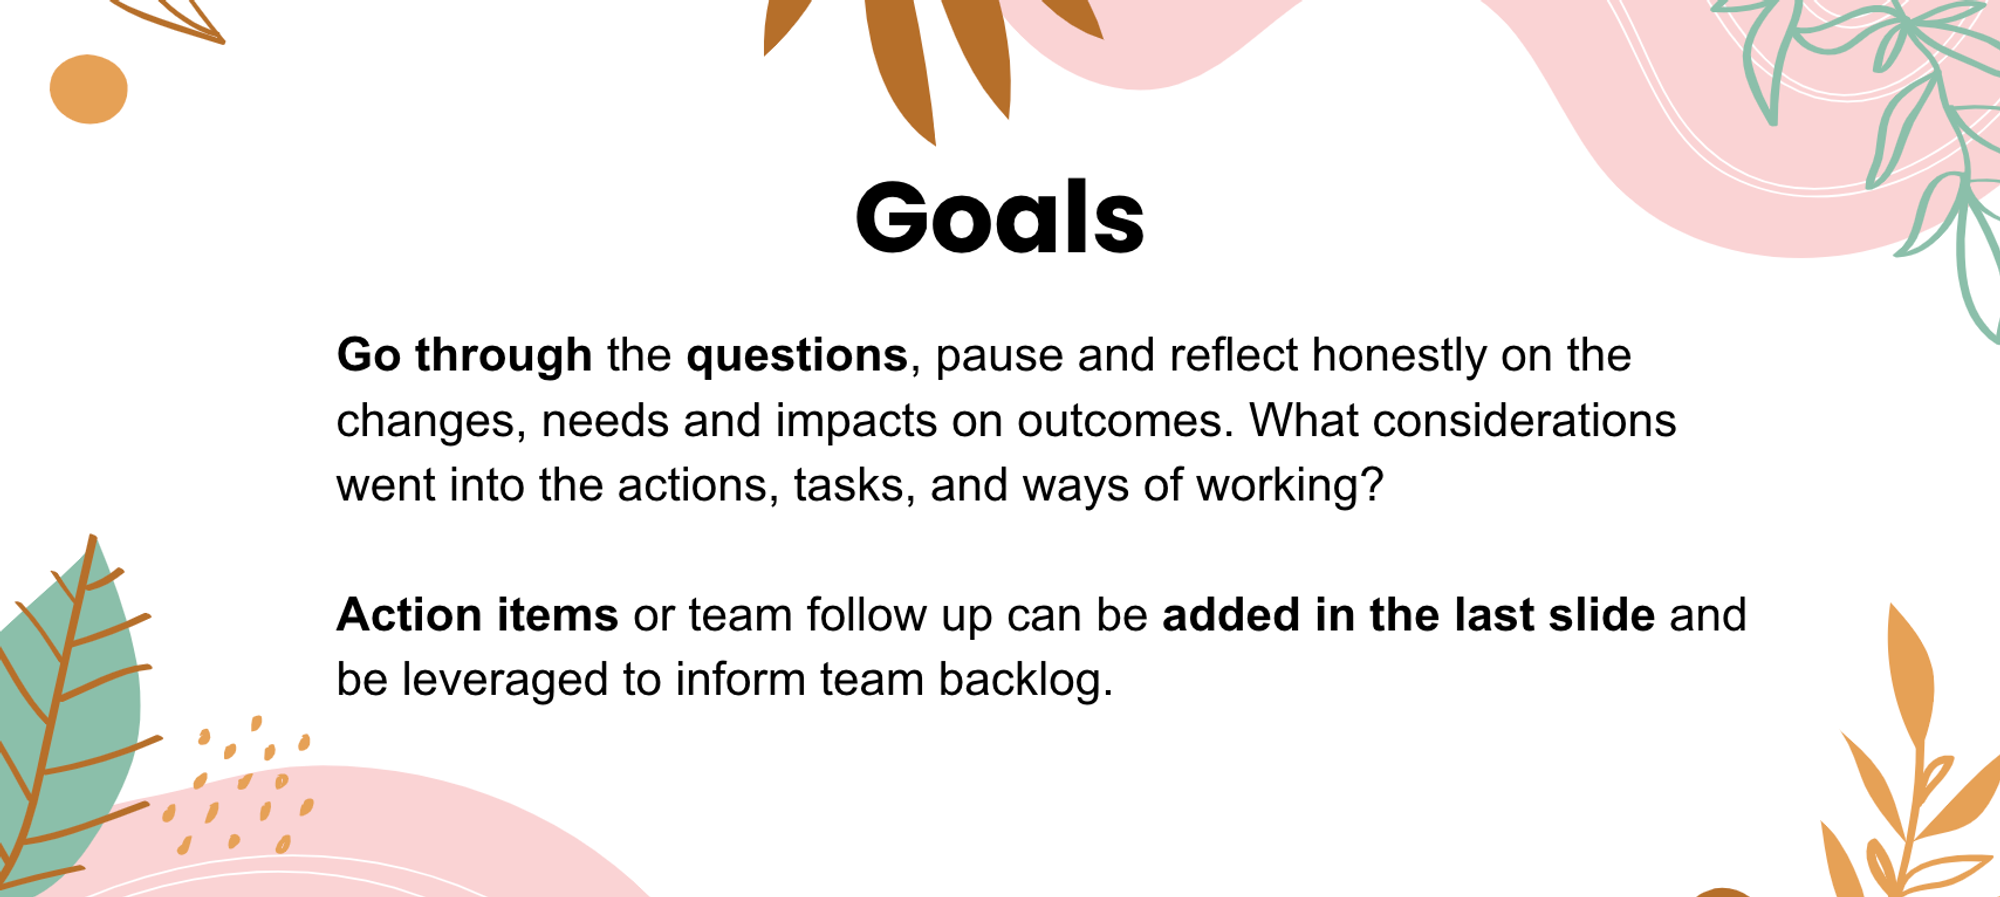 Goals: Go through the questions, pause and reflect honestly on the changes, needs and impacts on outcomes. What considerations went into the actions, tasks and ways of working? Action items or team follow up can be added in the last slide and leveraged to inform team backlogs.